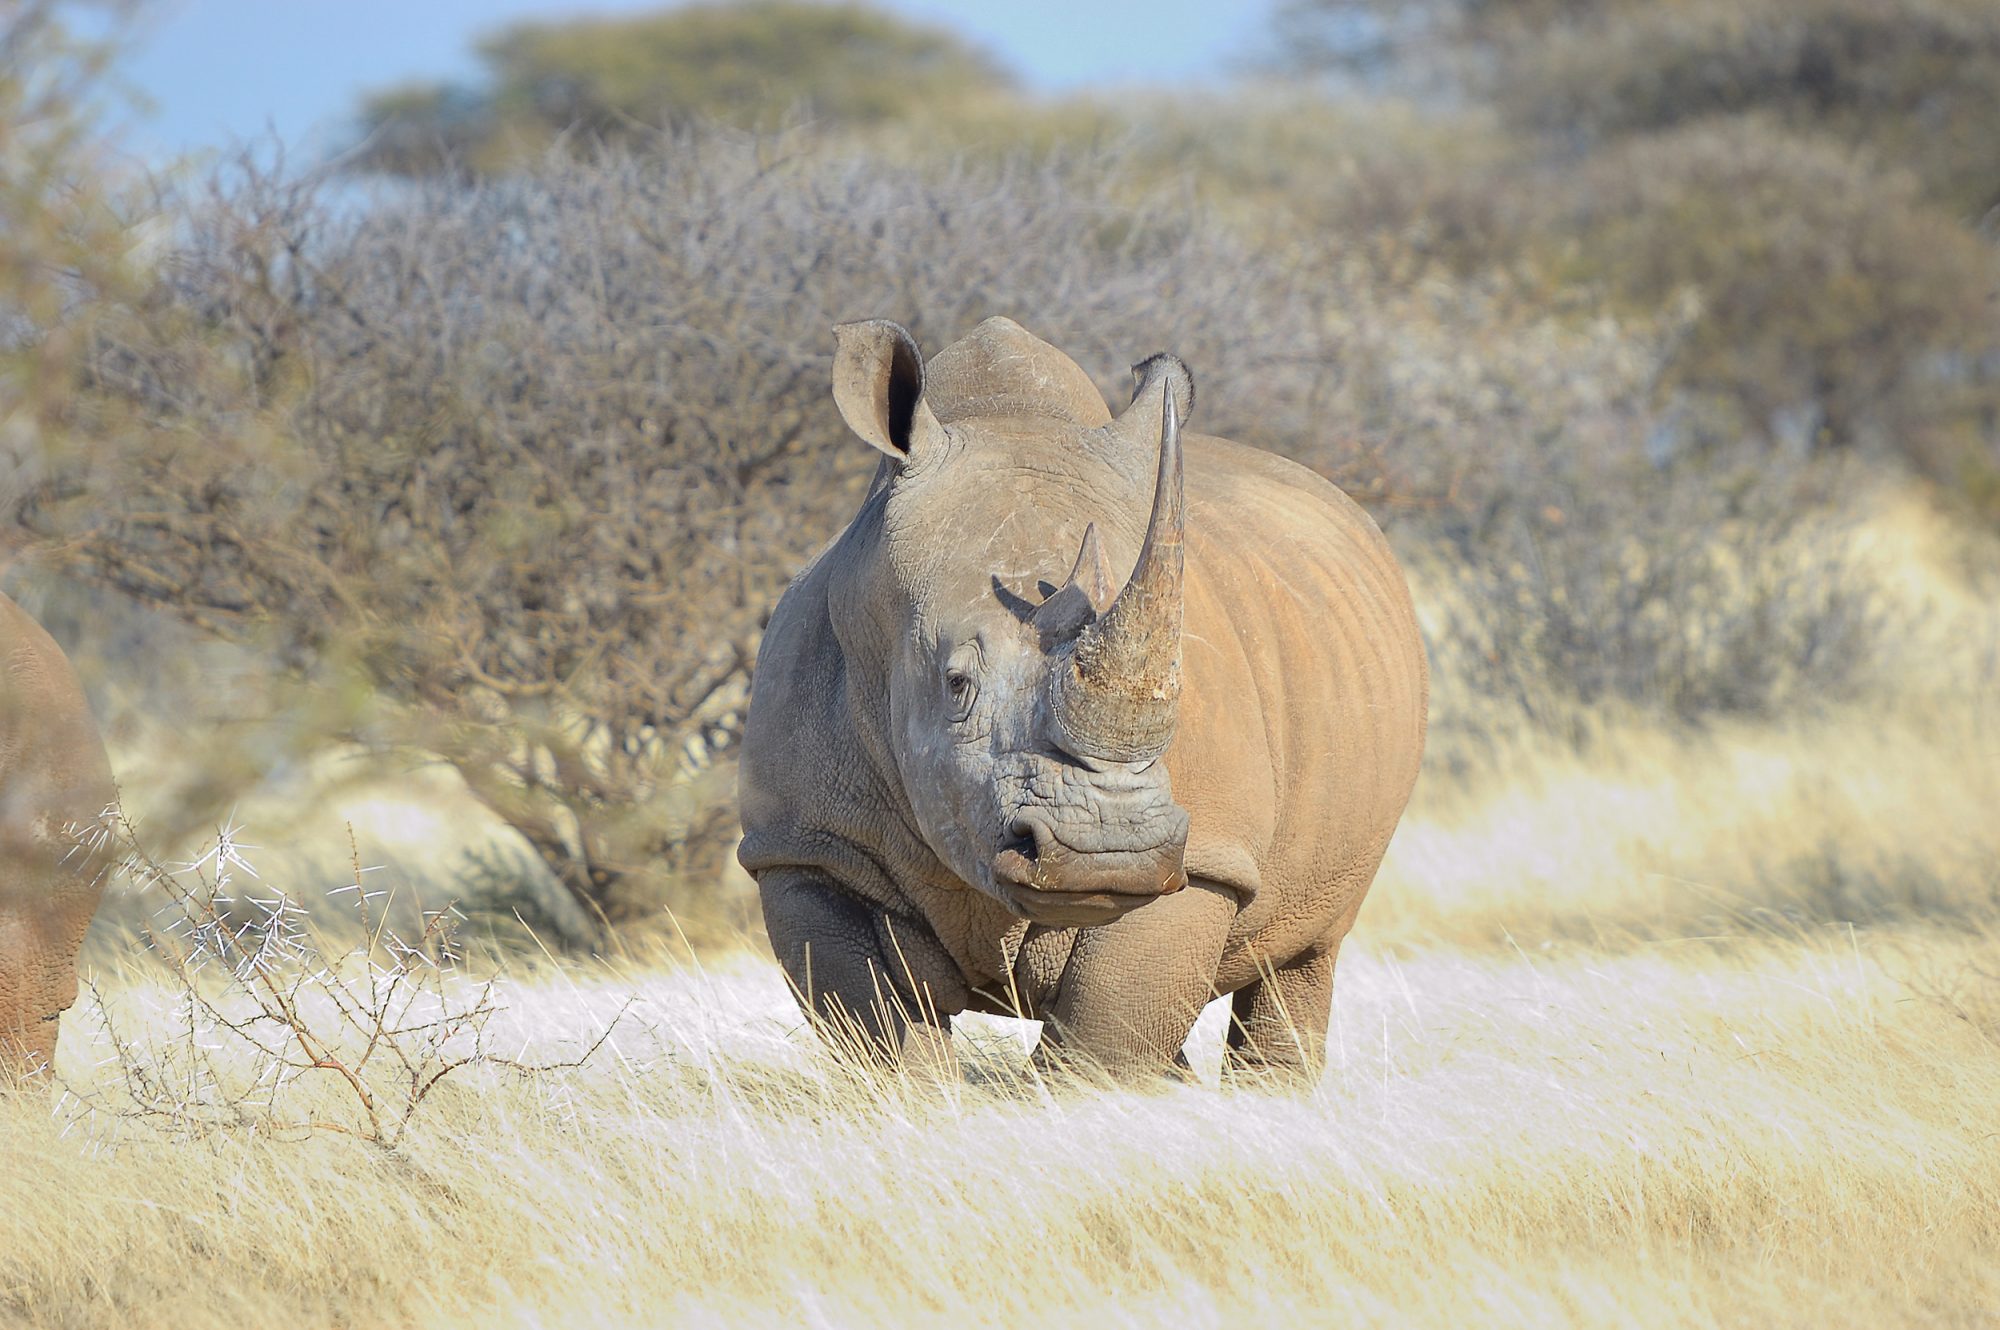 Has rhino gone extinct after 55 million years on Earth?